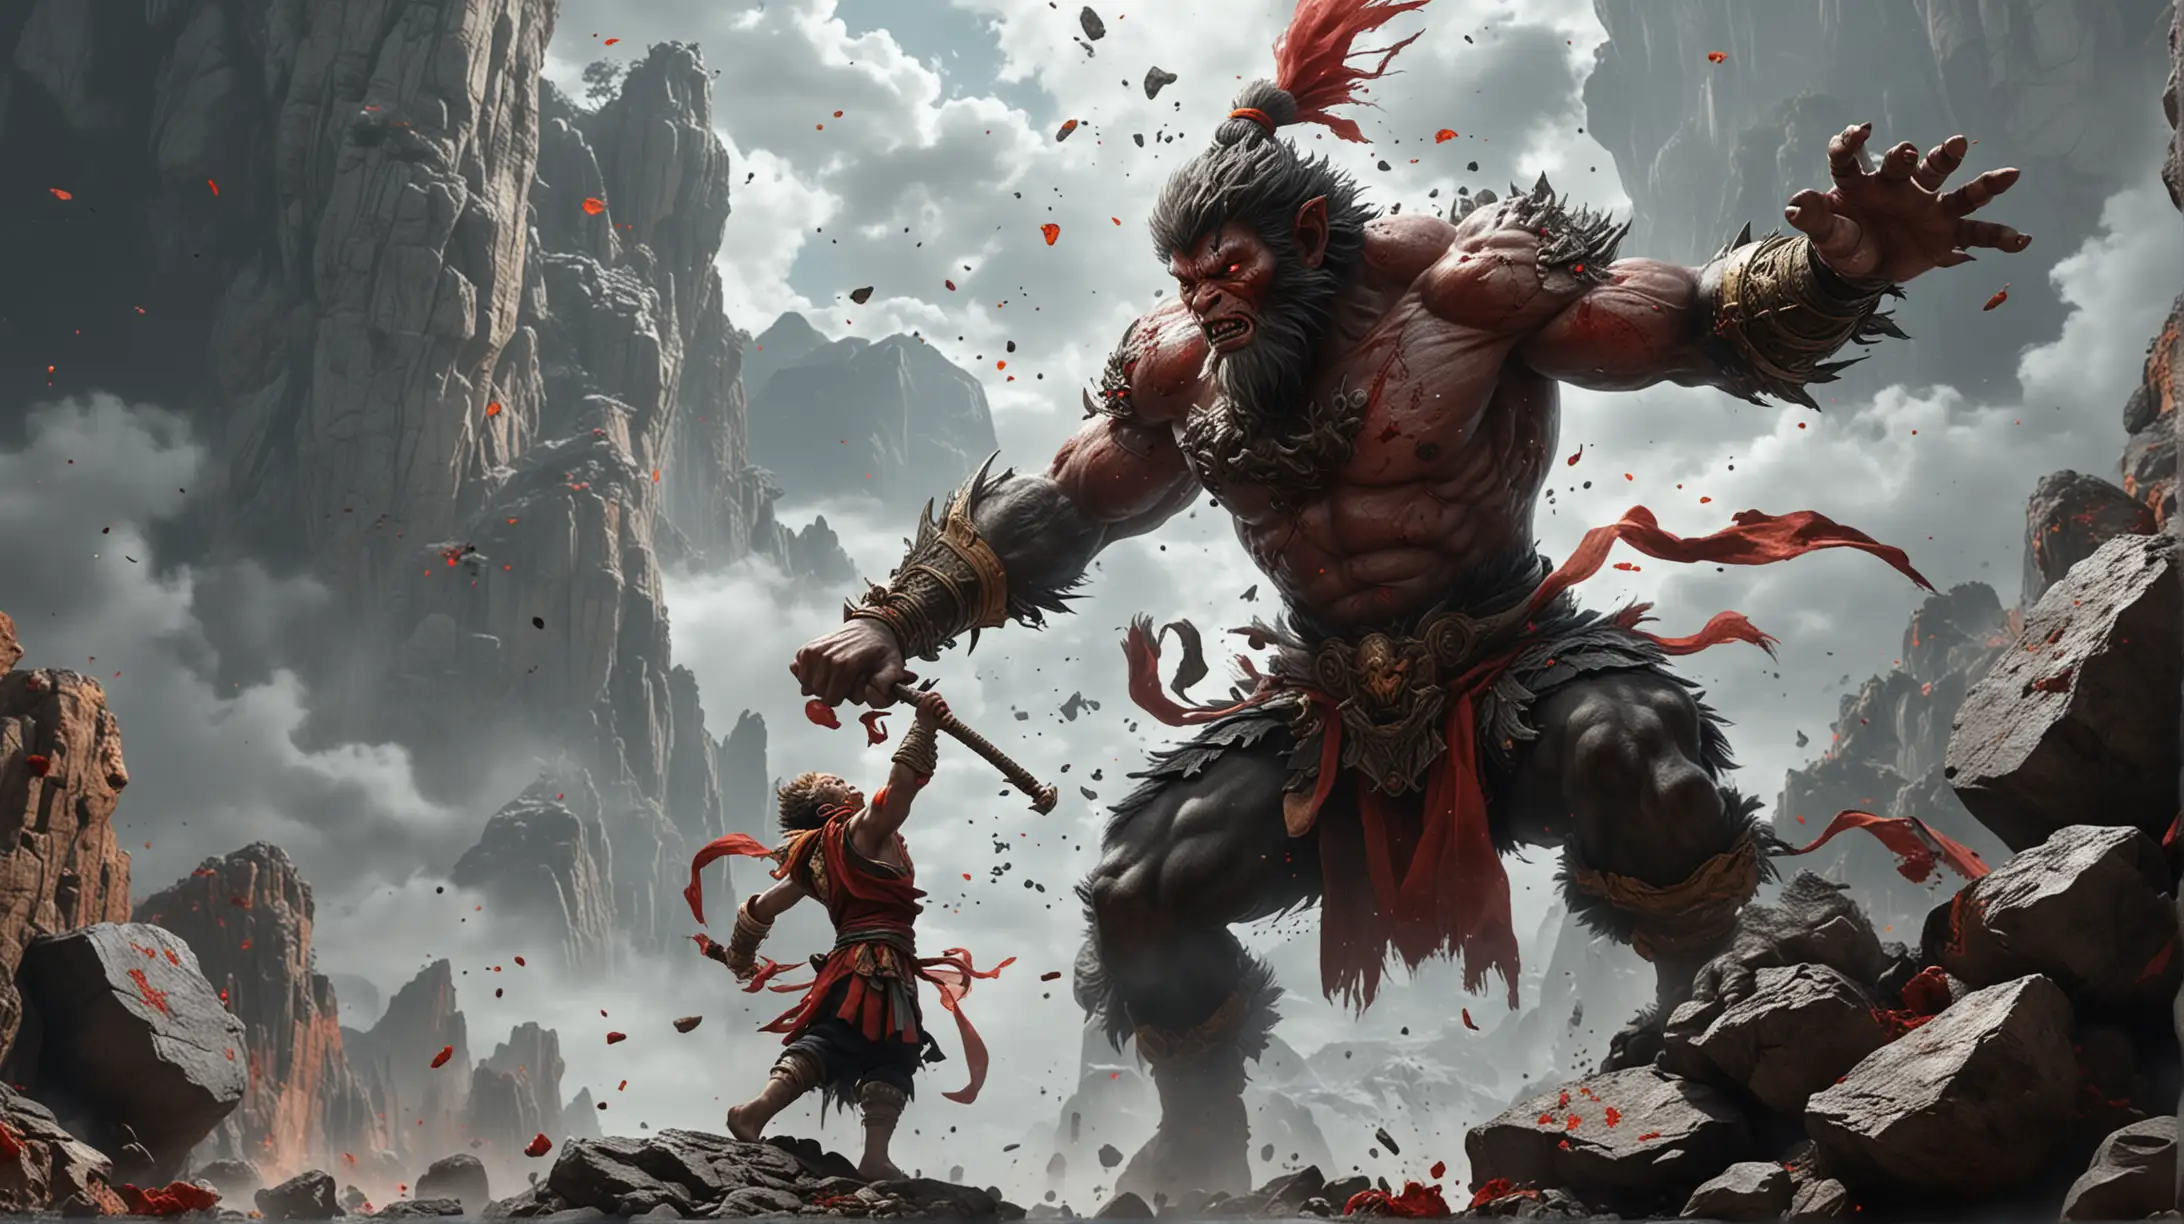 Epic Battle of Son God Wukong Against Bloodied Stone Giant in Sky